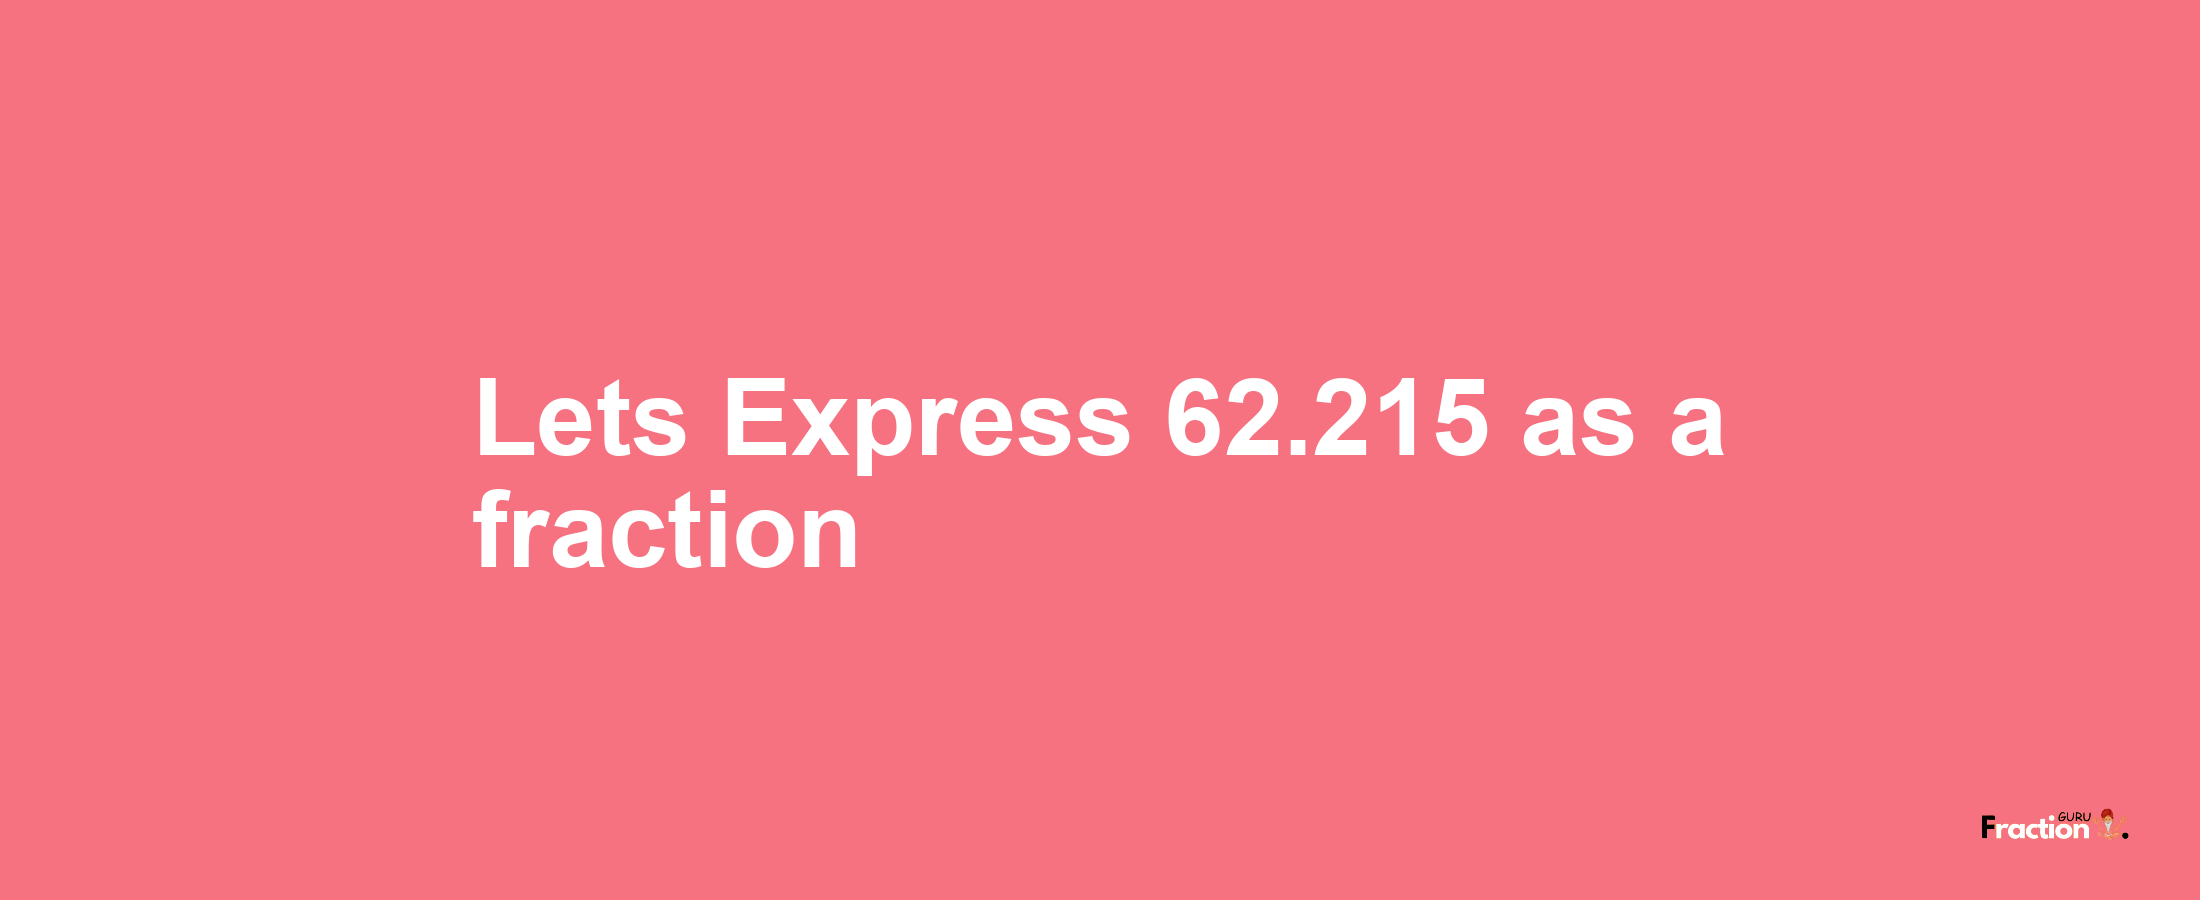 Lets Express 62.215 as afraction